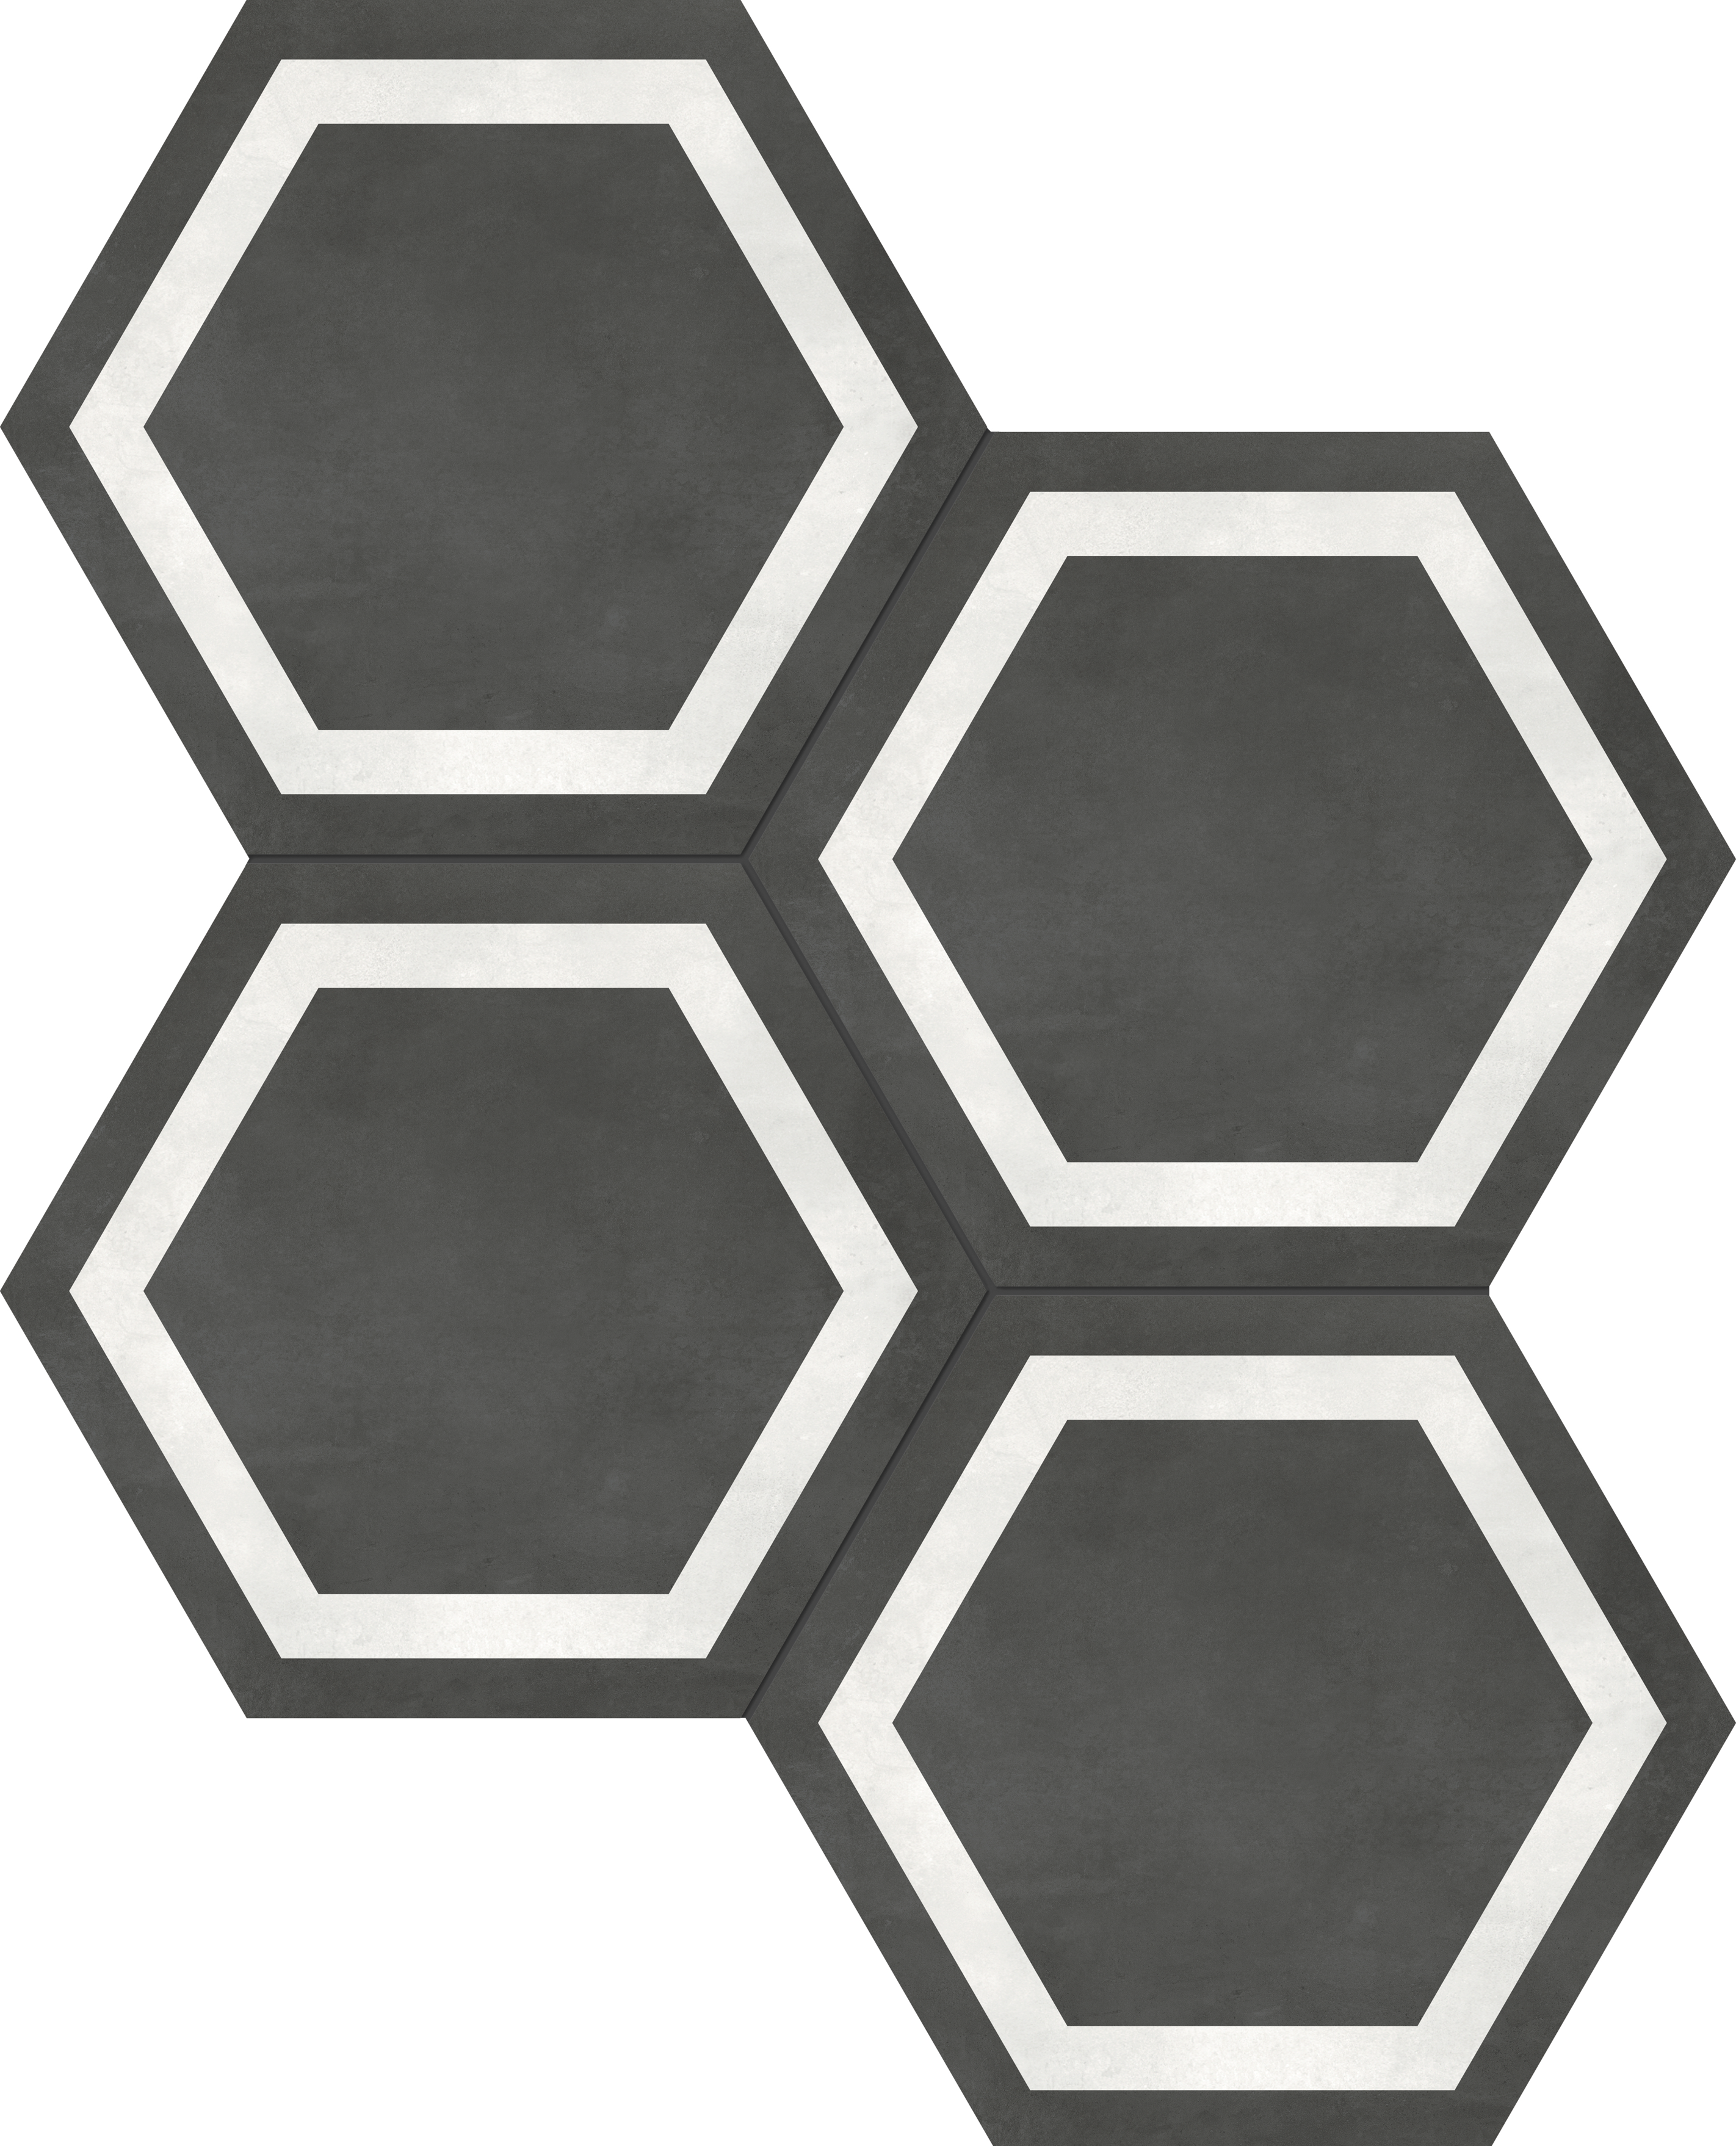 graphite print pattern glazed porcelain deco tile from form anatolia collection distributed by surface group international matte finish pressed edge 7-inch hexagon shape